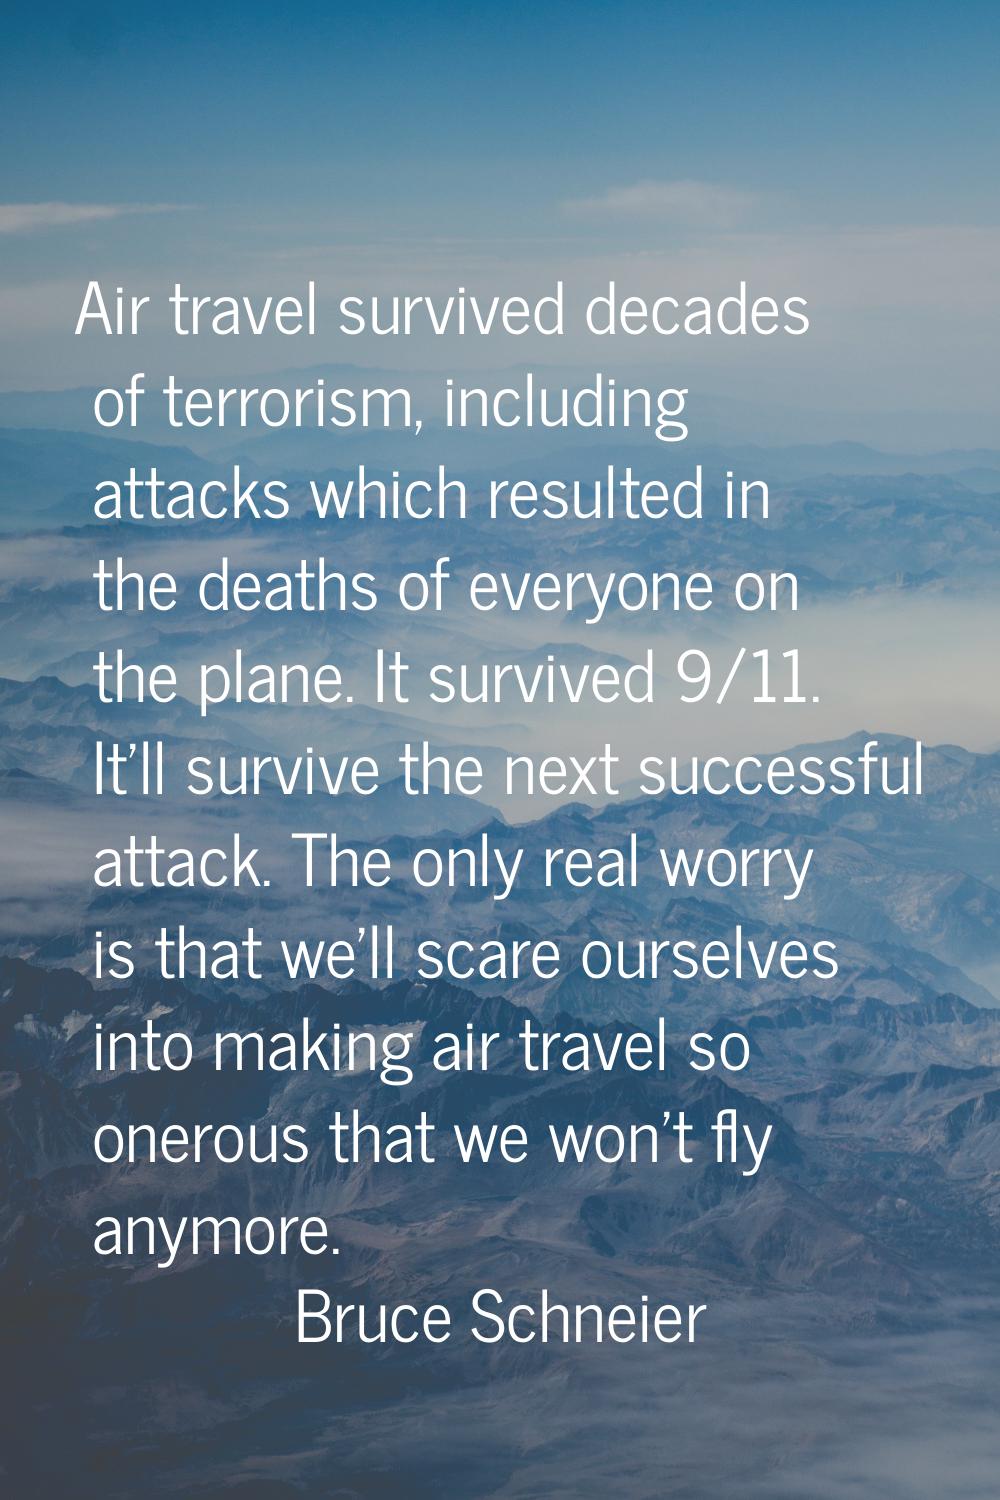 Air travel survived decades of terrorism, including attacks which resulted in the deaths of everyon